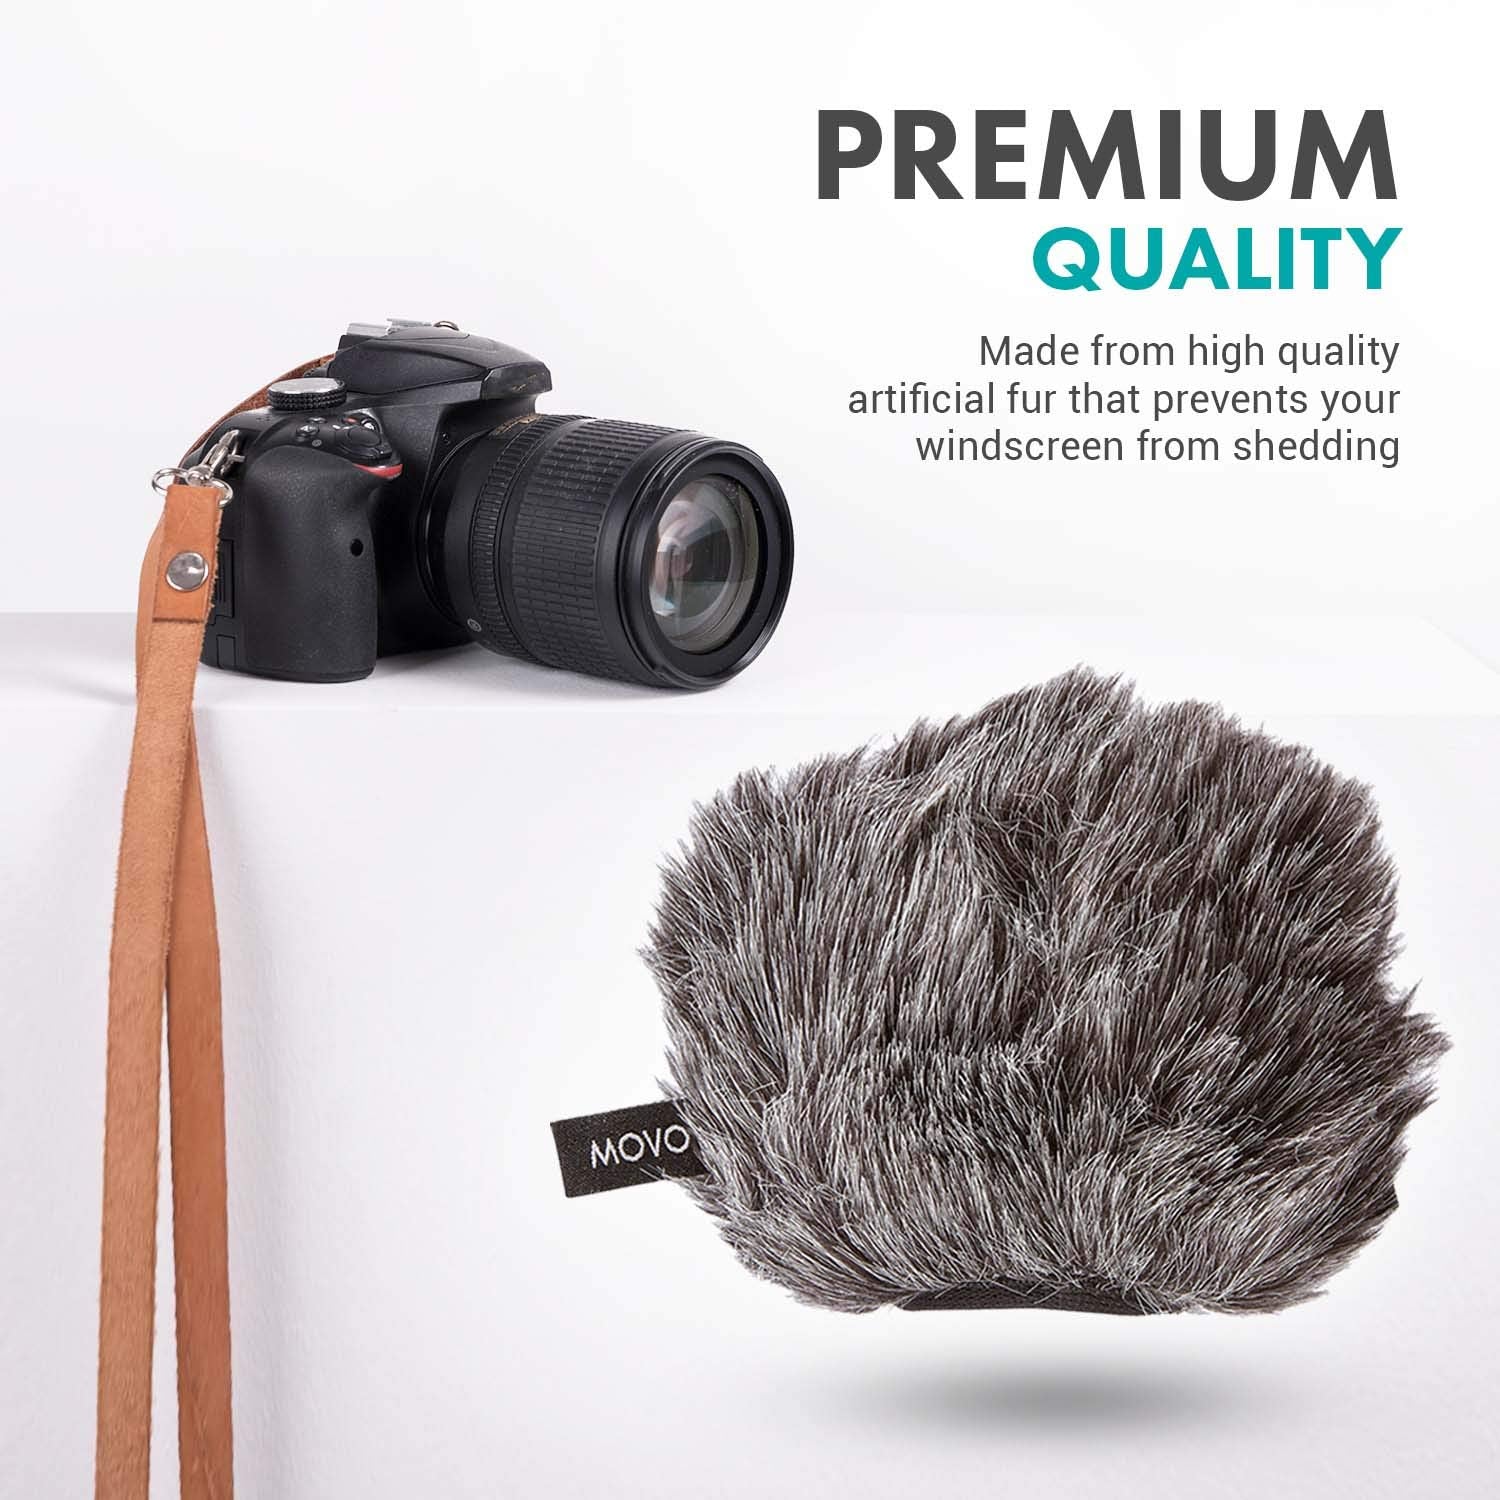 Movo WS-G9 Furry Outdoor Microphone Windscreen Muff for Portable Digital Recorders up to 3" X 1.5" (W x D) - Fits the Zoom H4n, H4n PRO, H5, H6, Tascam DR-40, DR-05, DR-07 and More (Dark Gray)  - Very Good